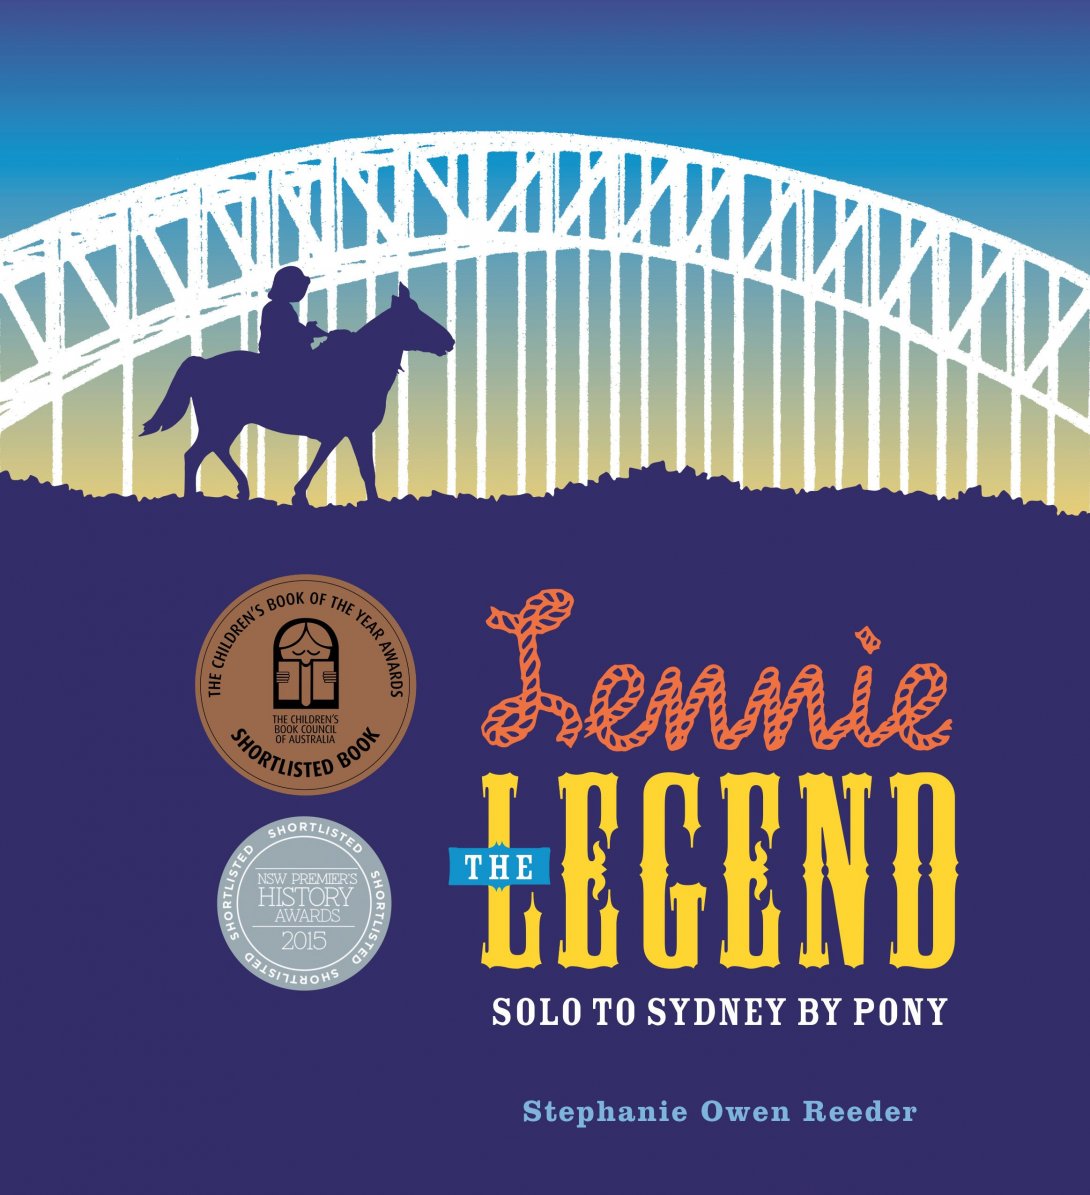 Lennie the Legend, Solo to Sydney by Pony book cover. Sydney harbor bridge with the shadow of a boy riding a horse over land.